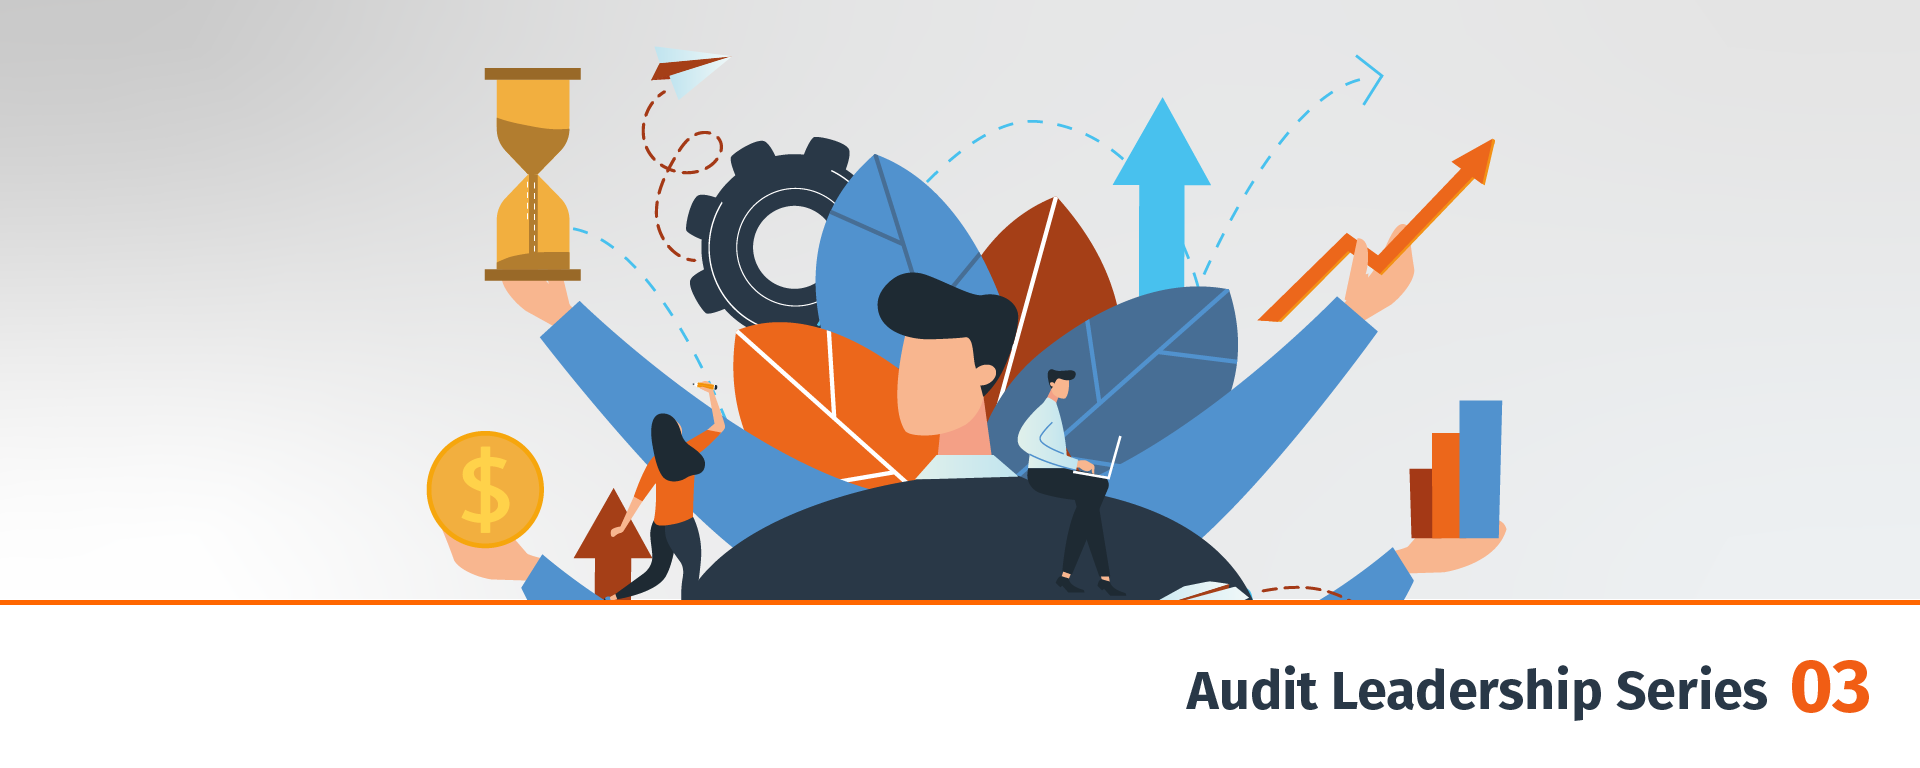 Measure the Performance of Internal Audit Departments